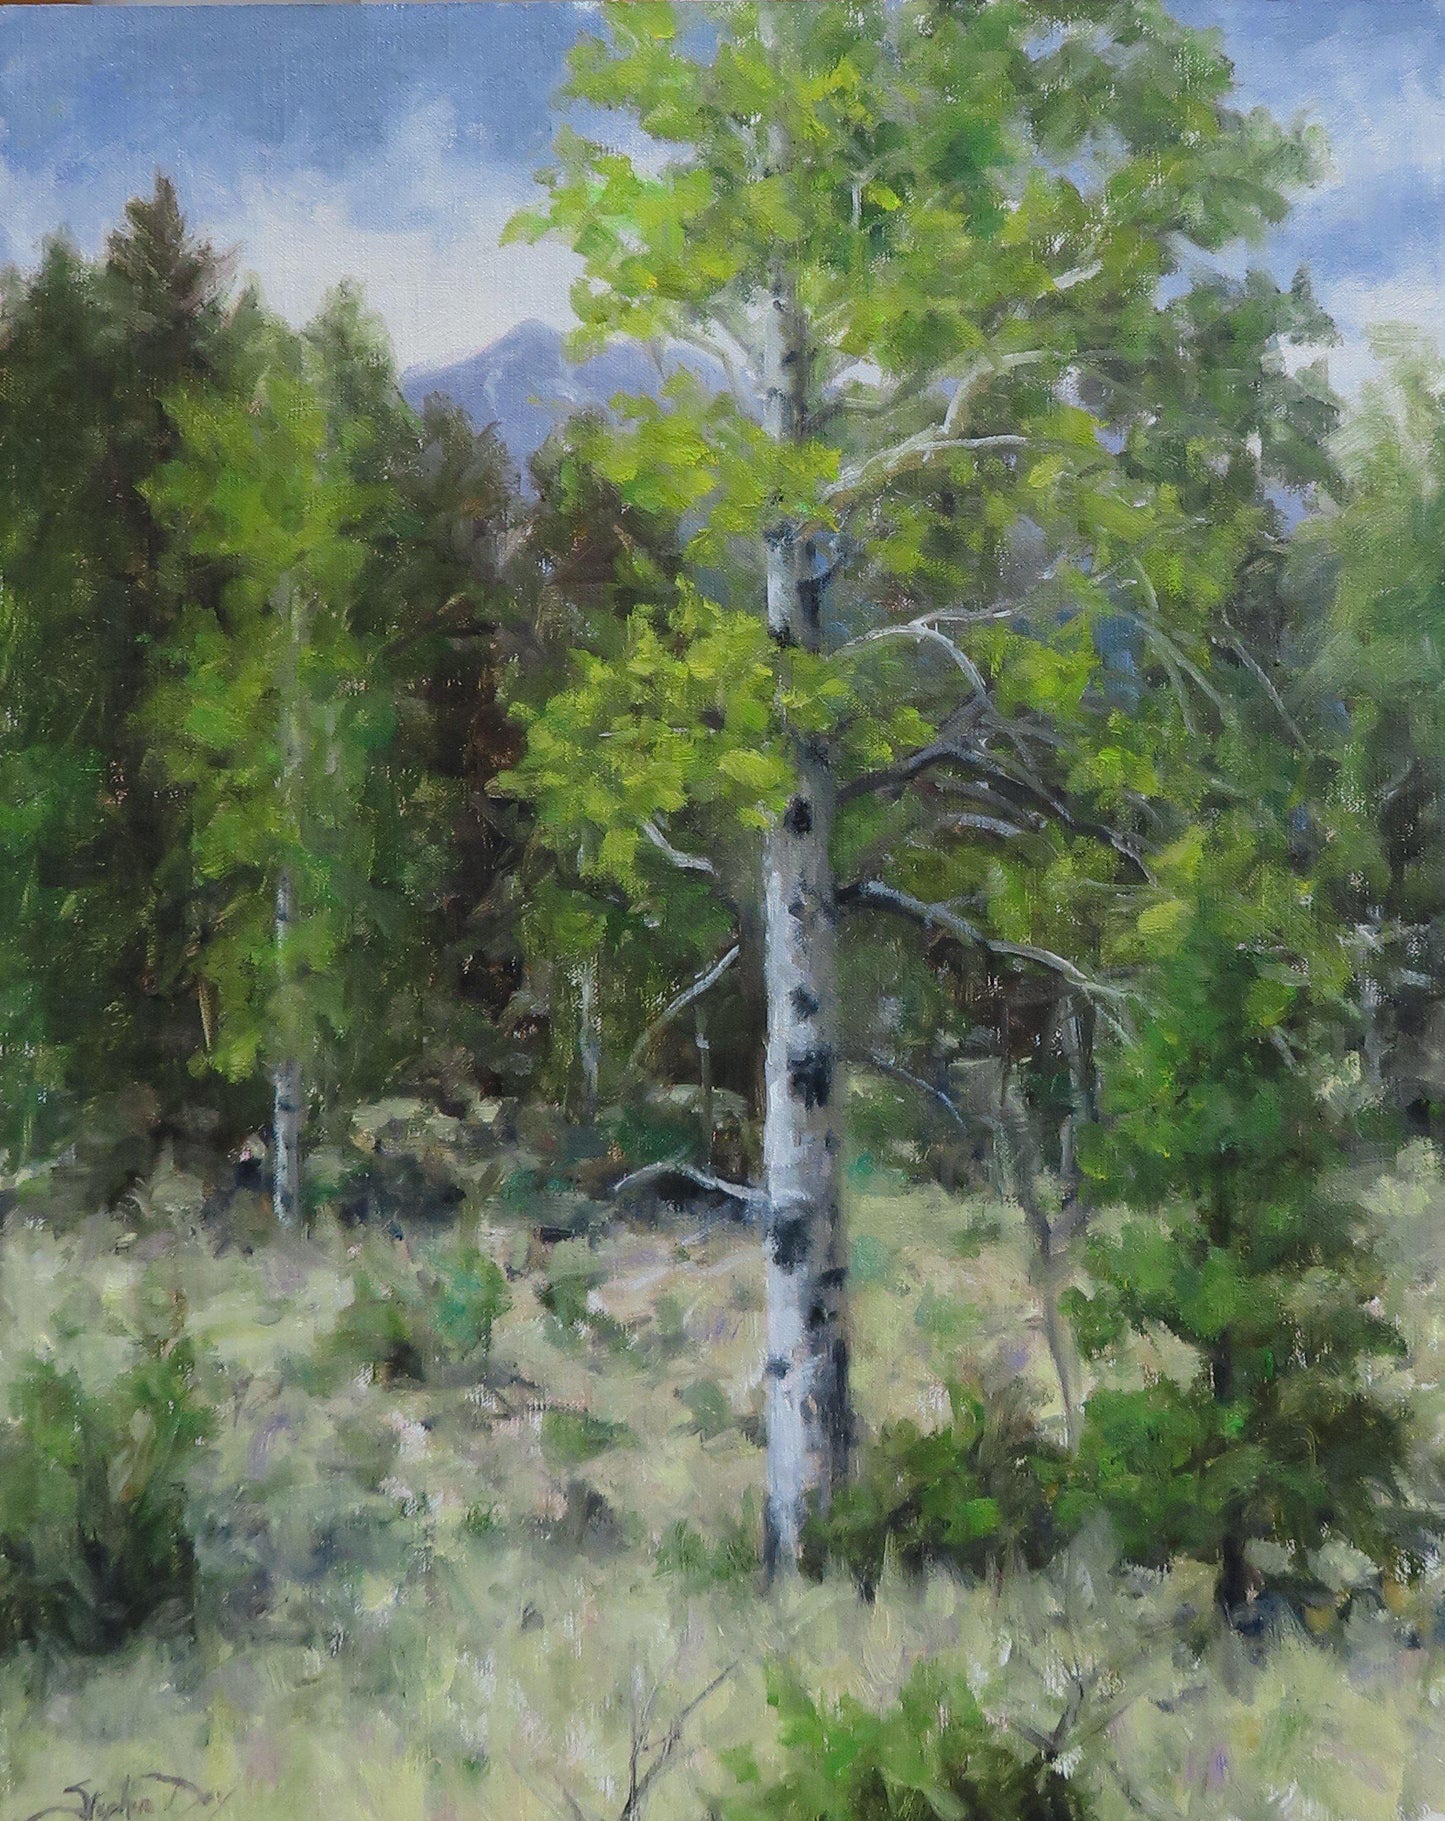 Old Growth Aspen-Painting-Stephen Day-Sorrel Sky Gallery